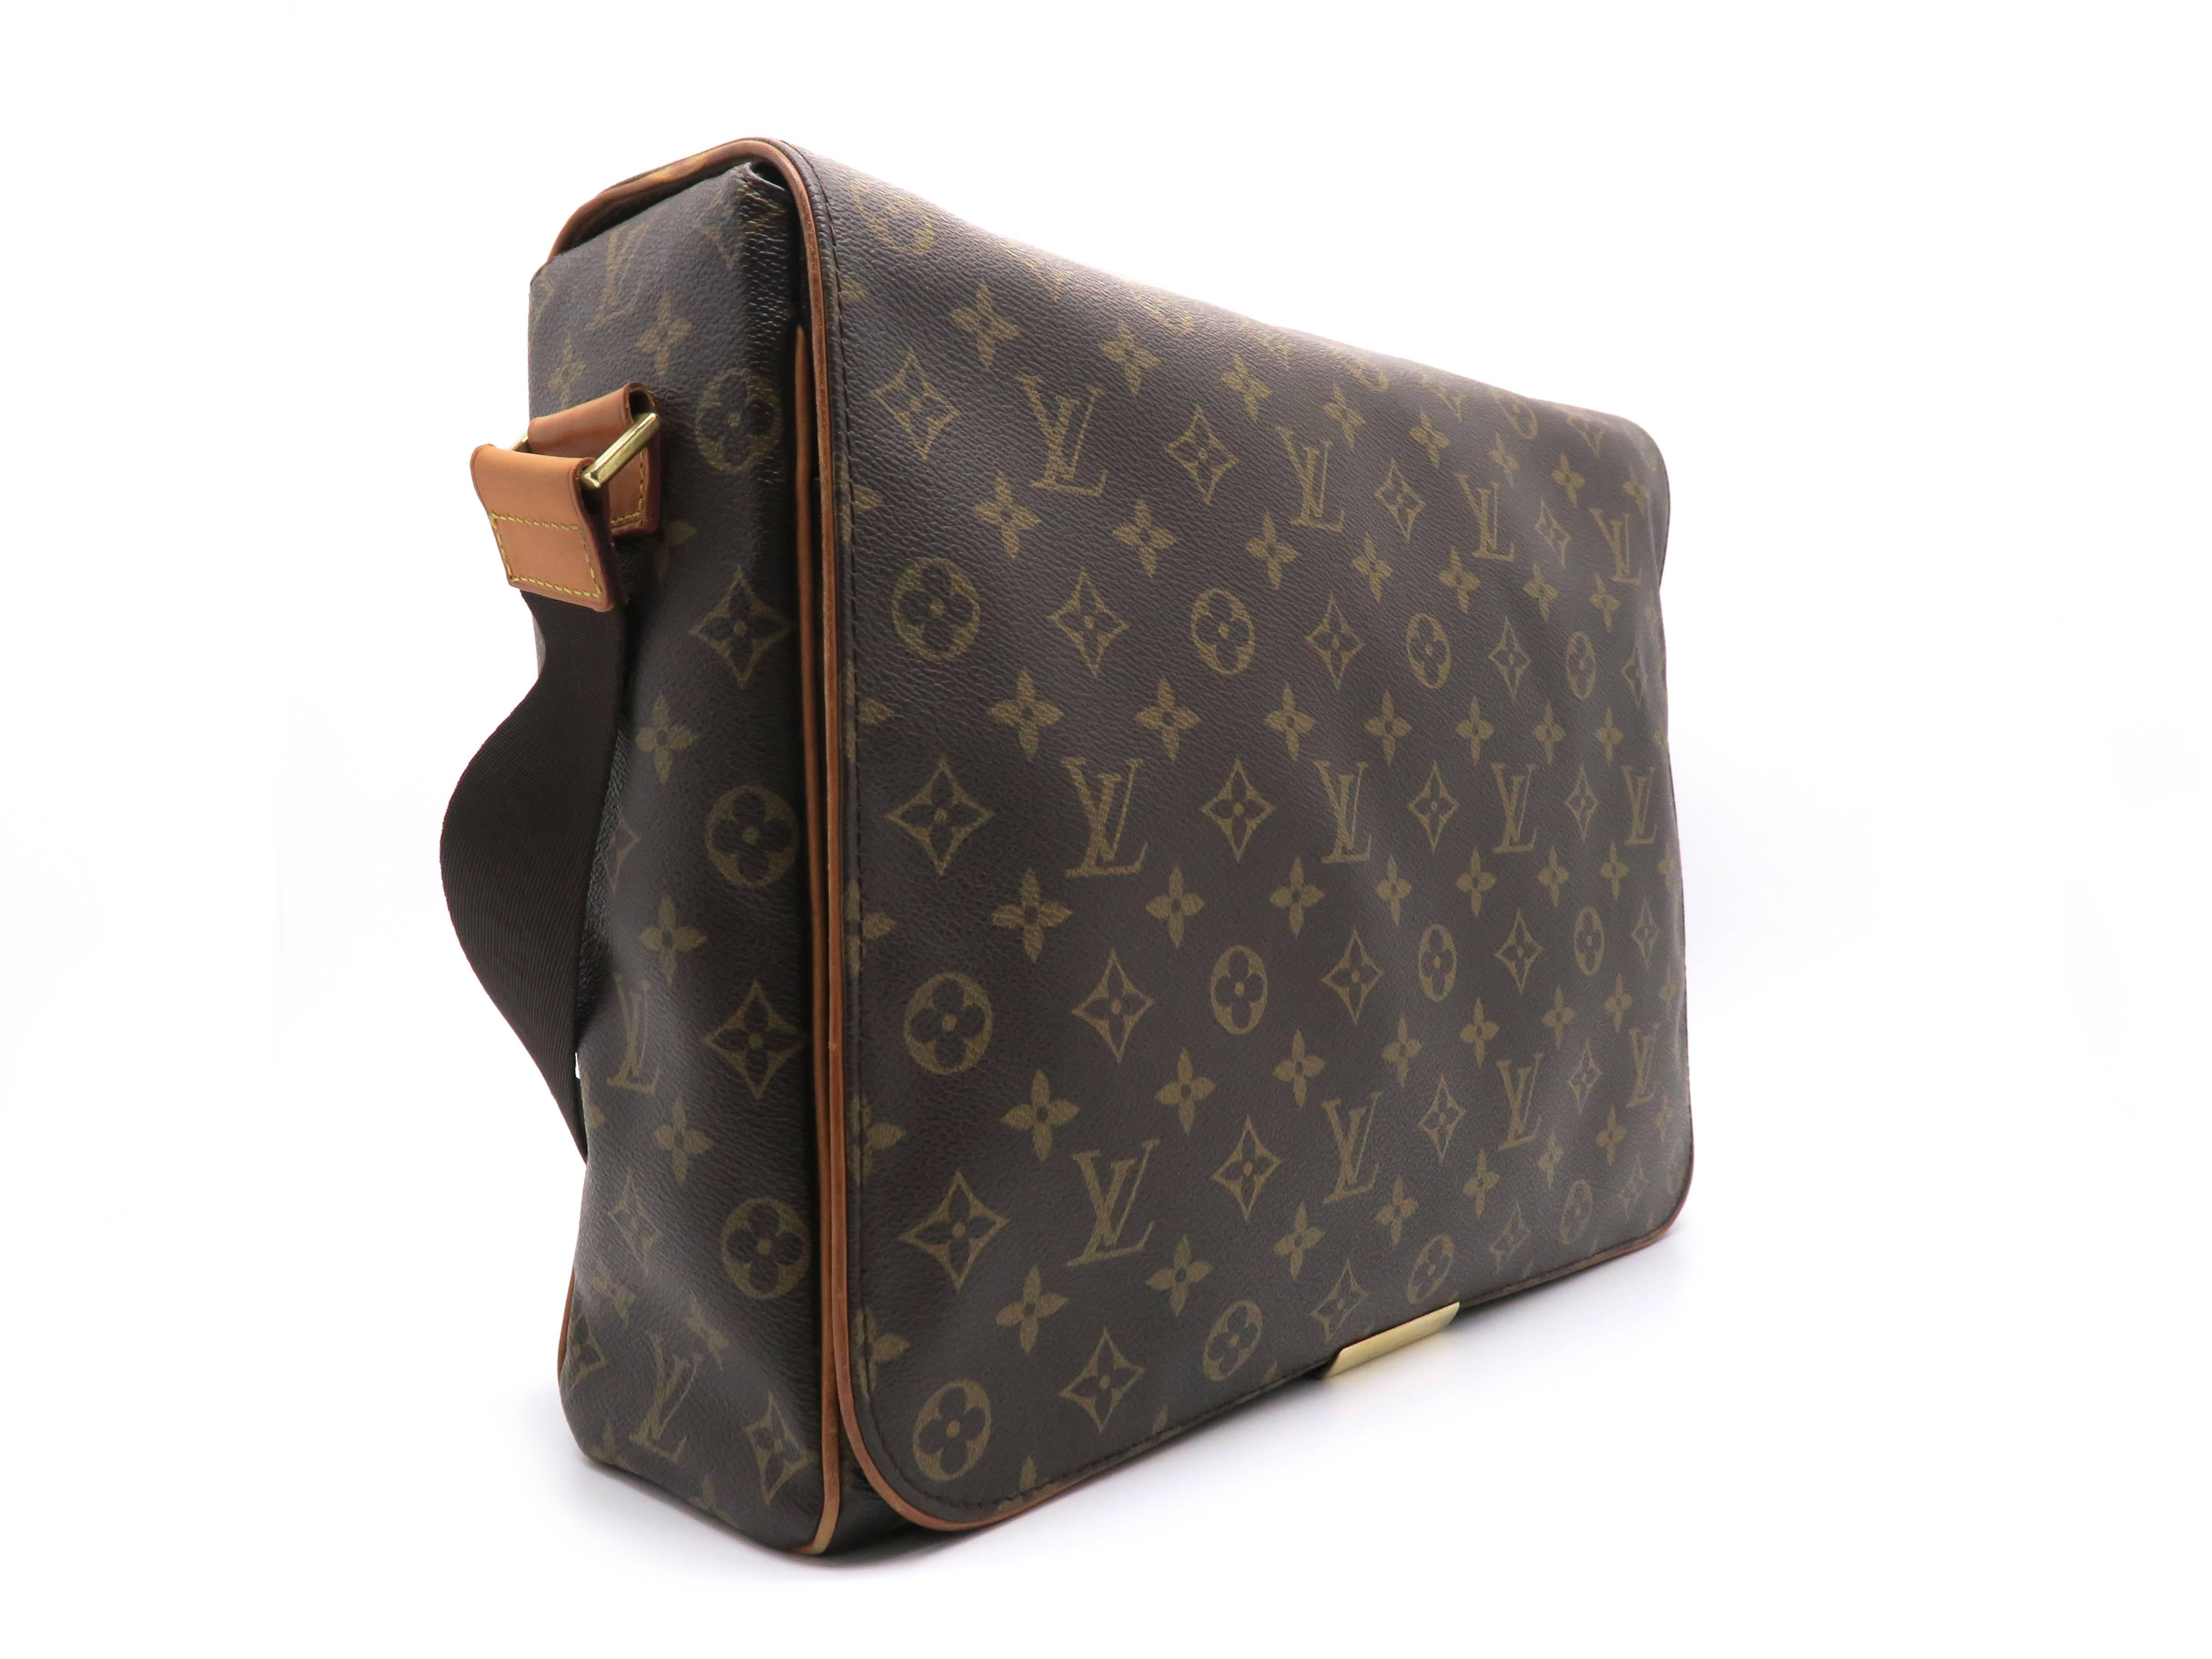 Color: Brown

Material: Monogram Canvas

Condition: Rank A 
Overall: Good, few minor defects 
Surface: Minor Scratches
Corners: Minor Scratches
Edges: Minor Scratches
Handles/Straps: Minor Scratches
Hardware: Minor Scratches


Dimension: W36 × H28 ×